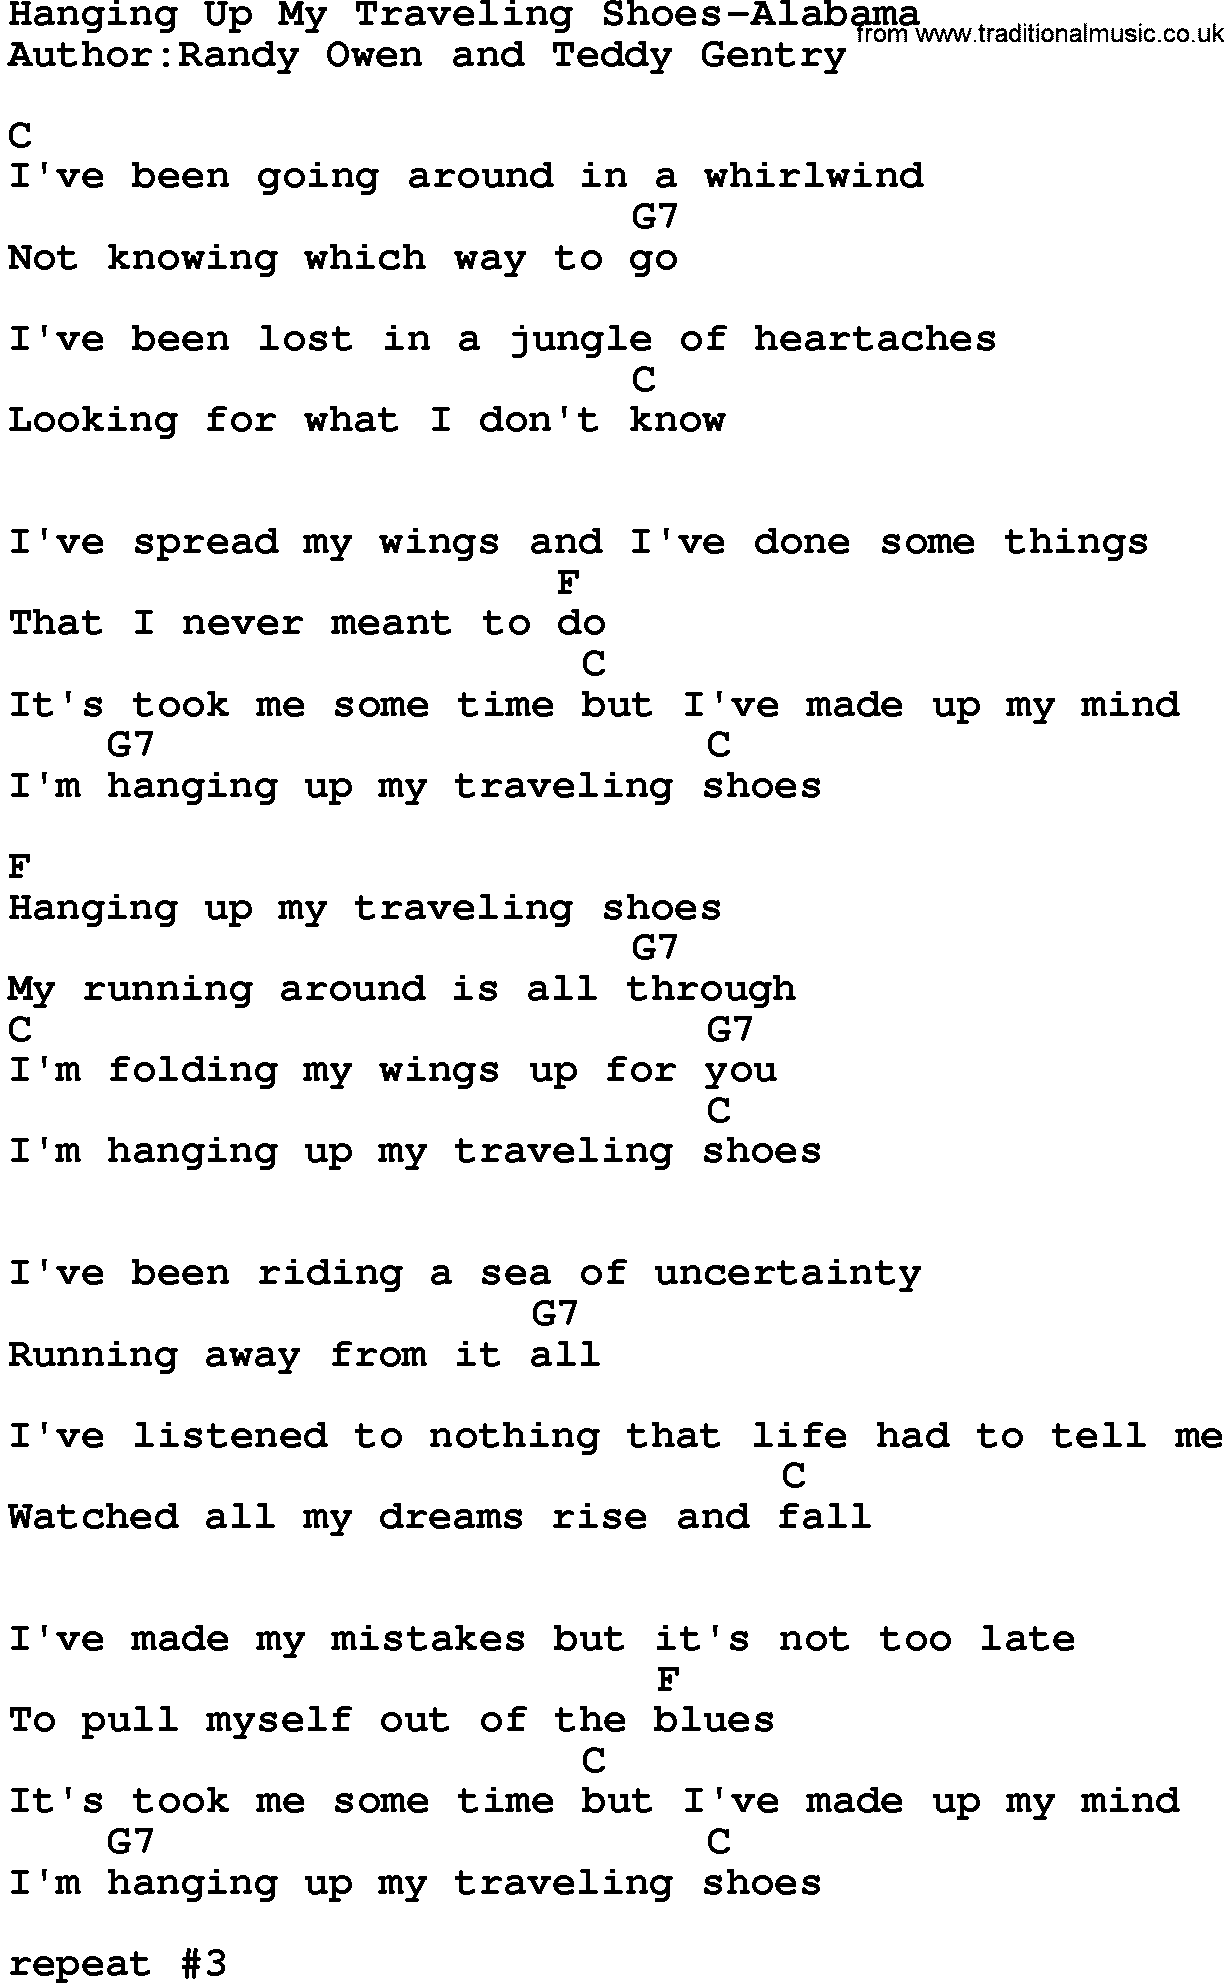 Country music song: Hanging Up My Traveling Shoes-Alabama lyrics and chords